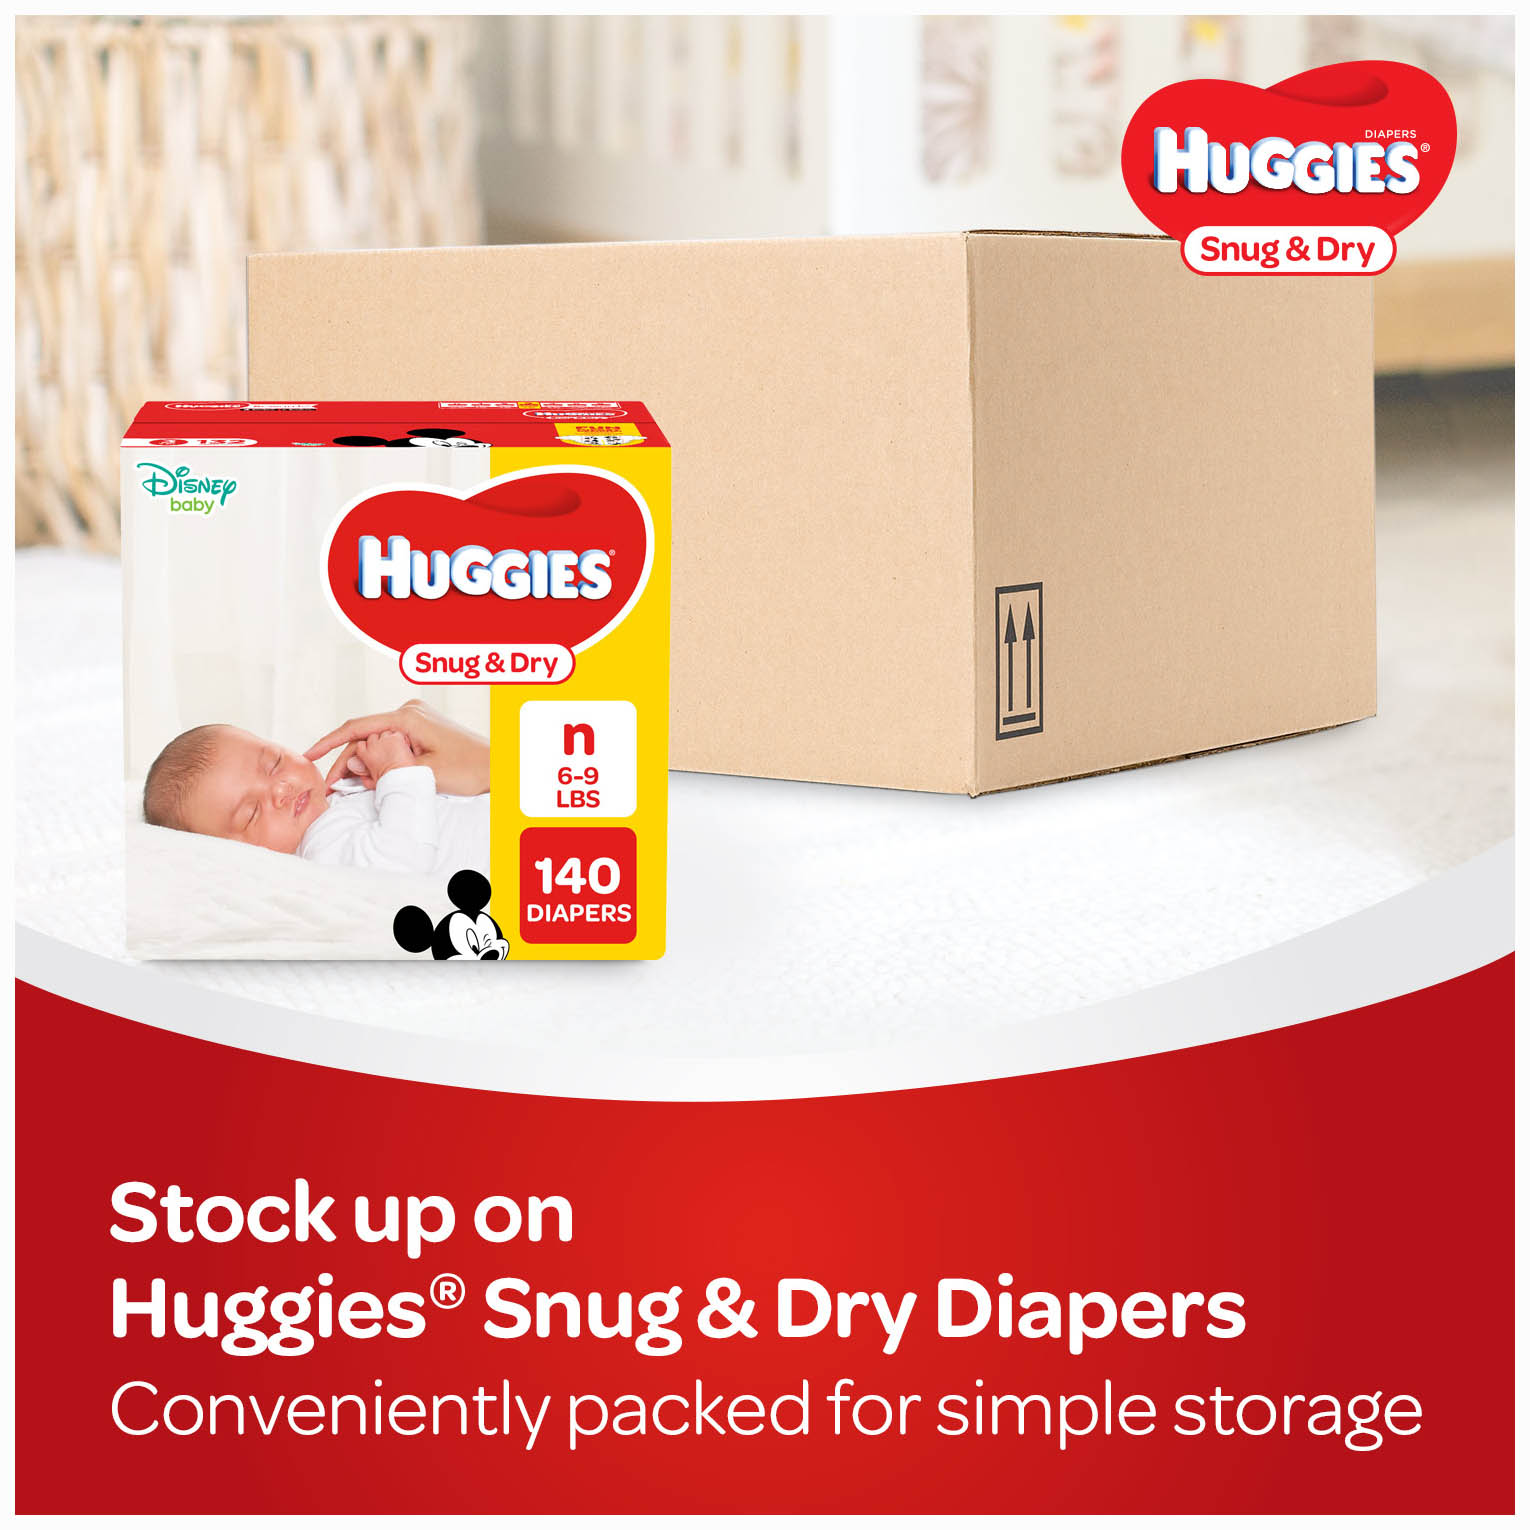 HUGGIES Snug & Dry Diapers, Size 1, 112 Count, BIG PACK (Packaging May Vary) - image 4 of 10